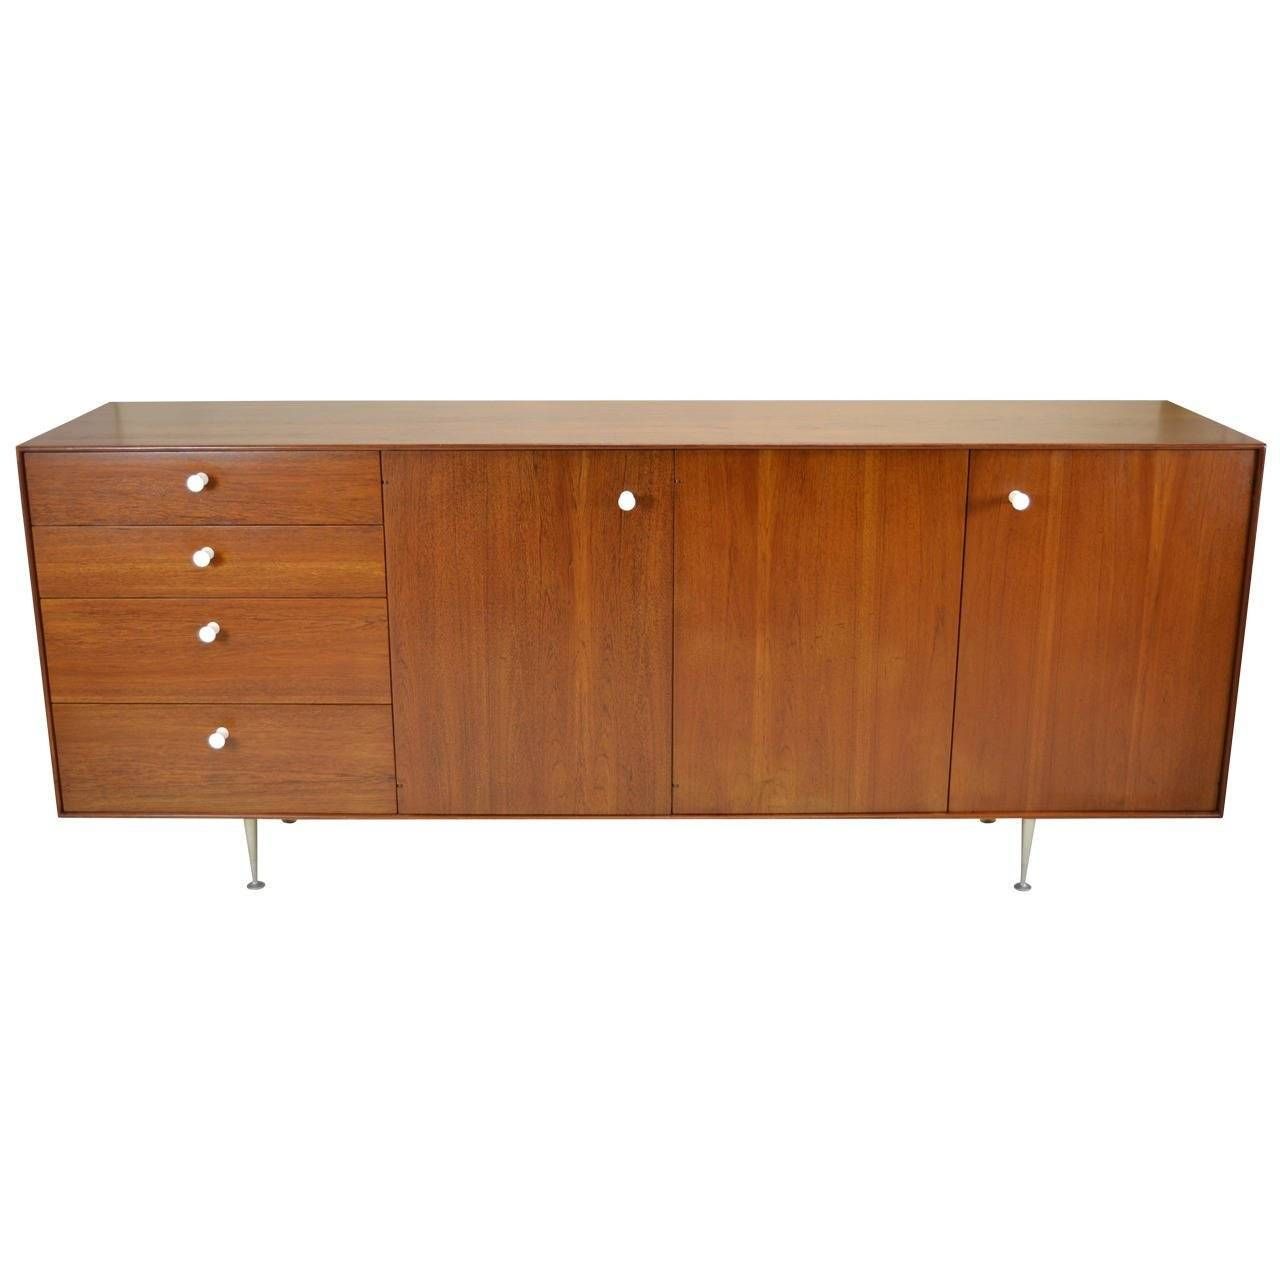 George Nelson Thin Edge Sideboard For Herman Miller, Circa 1950s Regarding Thin Sideboard (View 5 of 20)